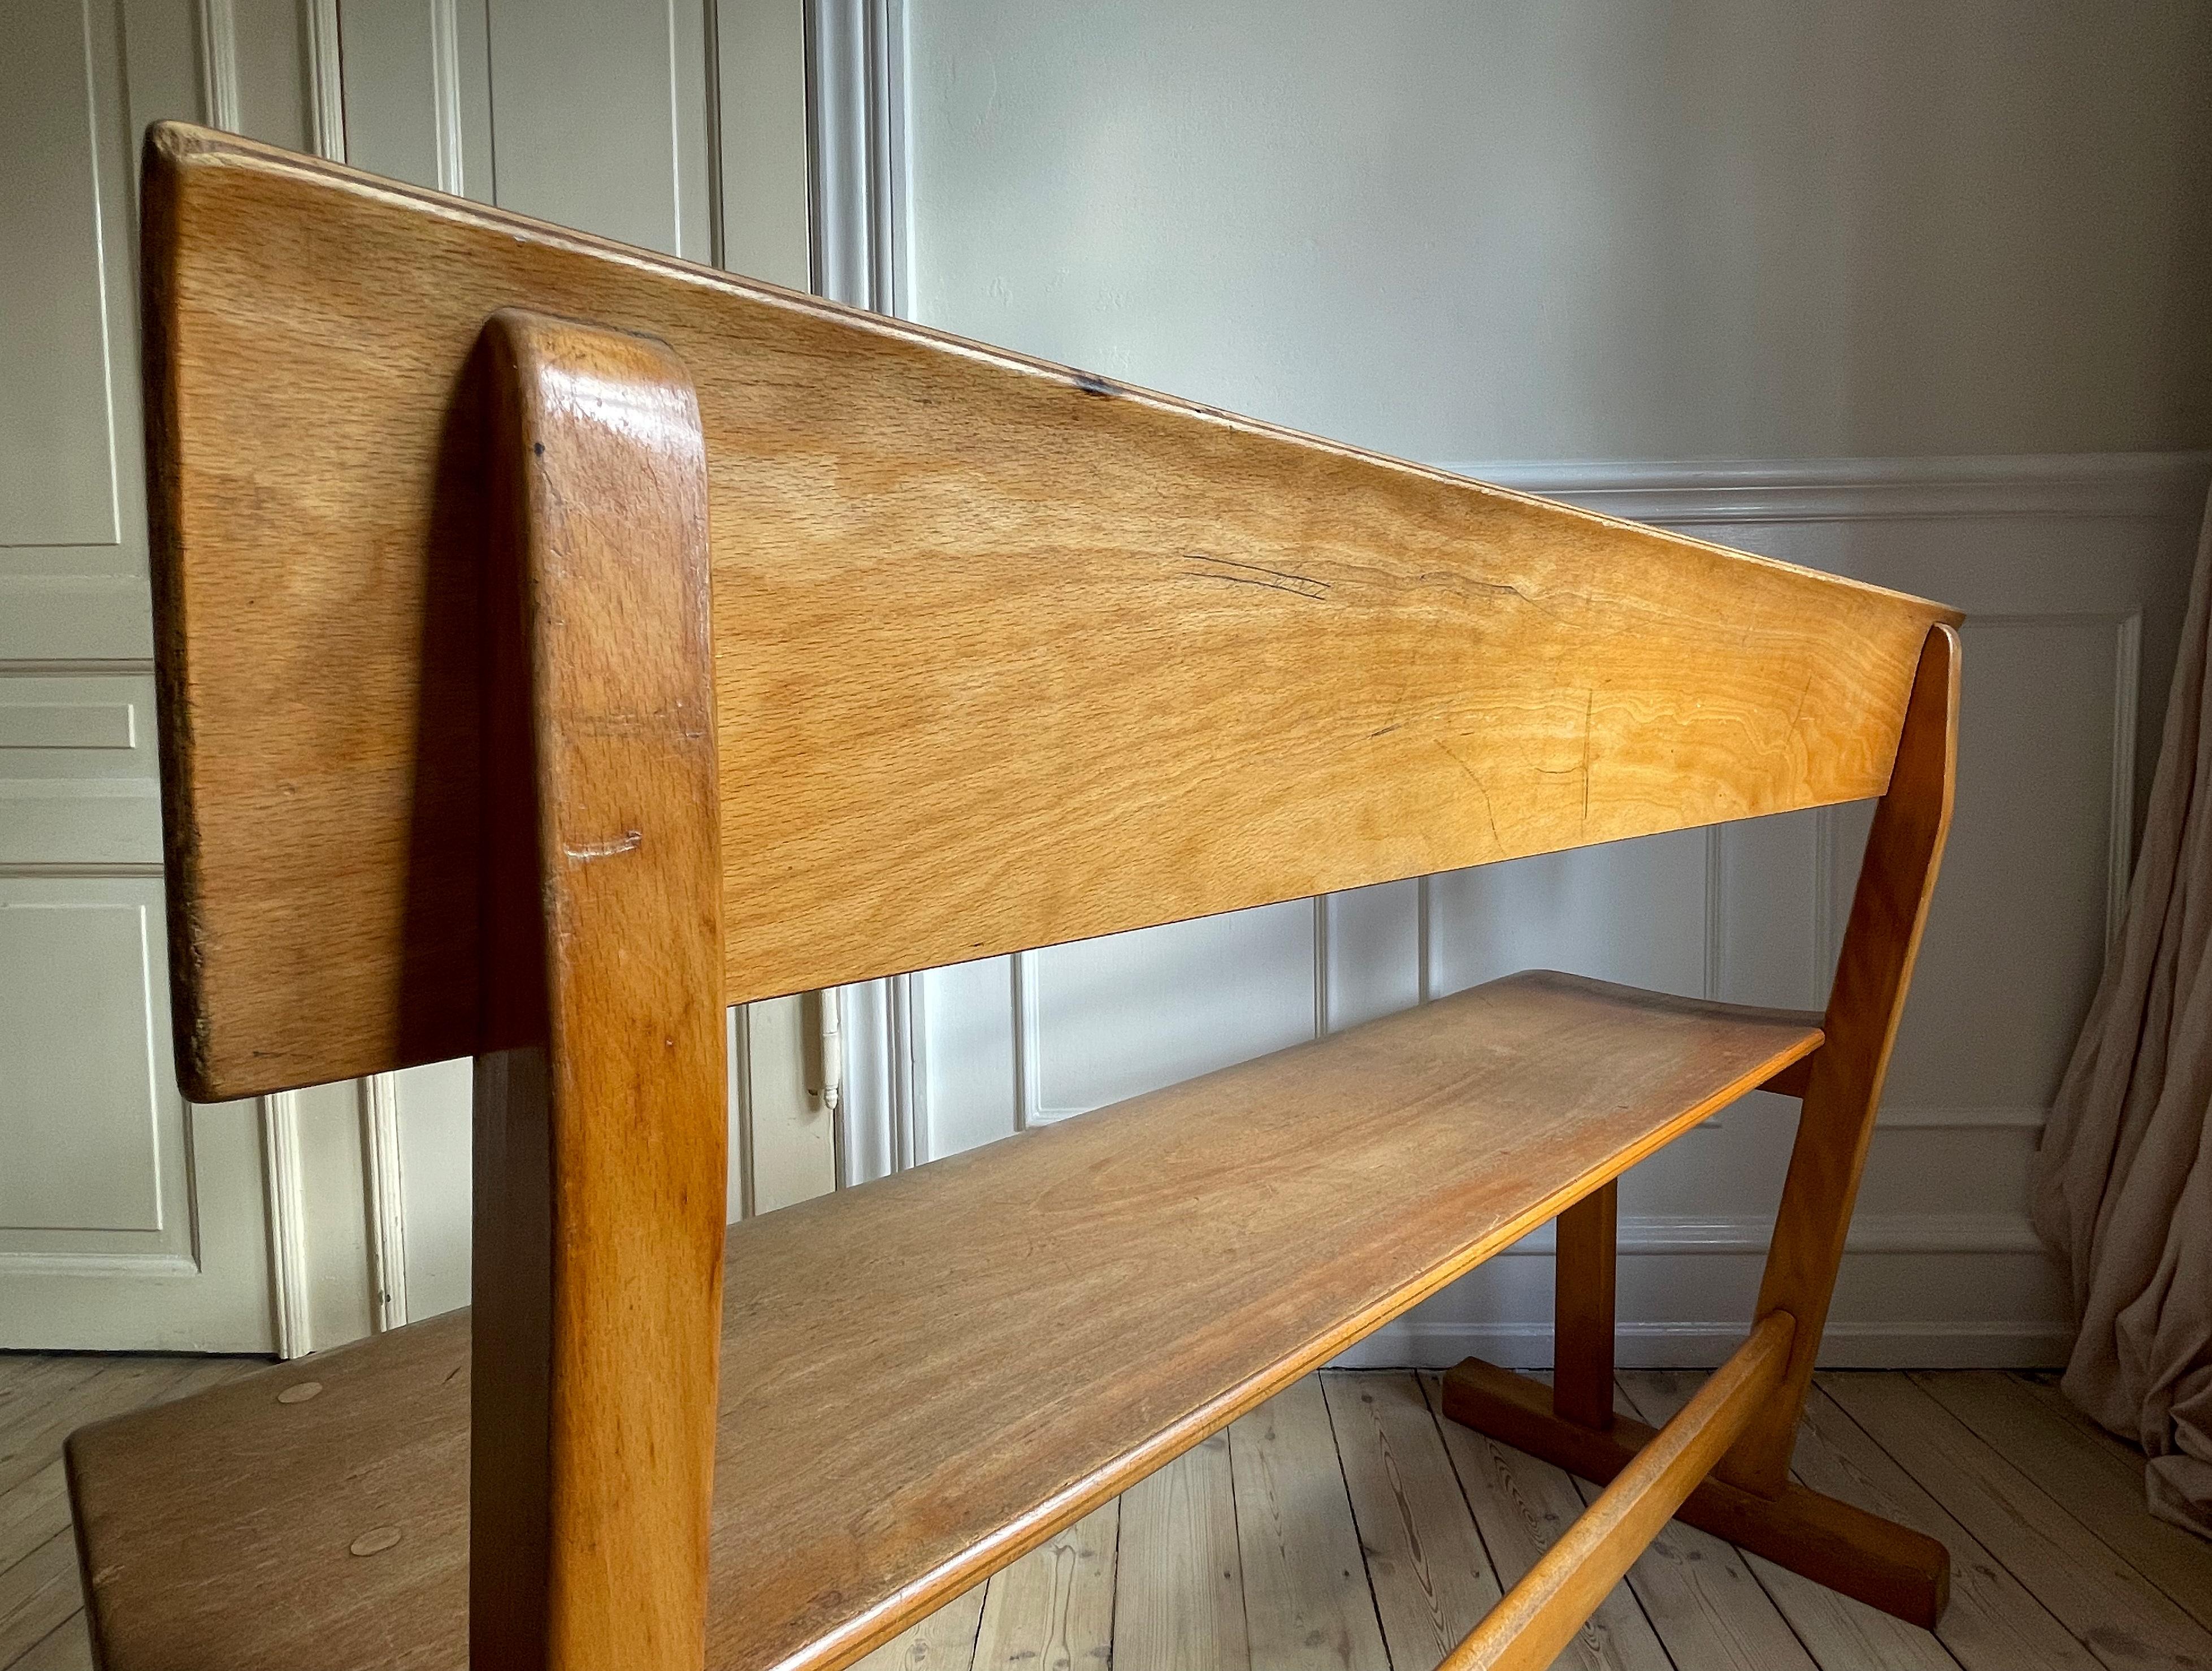 Danish Modern Hand-Crafted Wooden Bench, 1950s For Sale 1